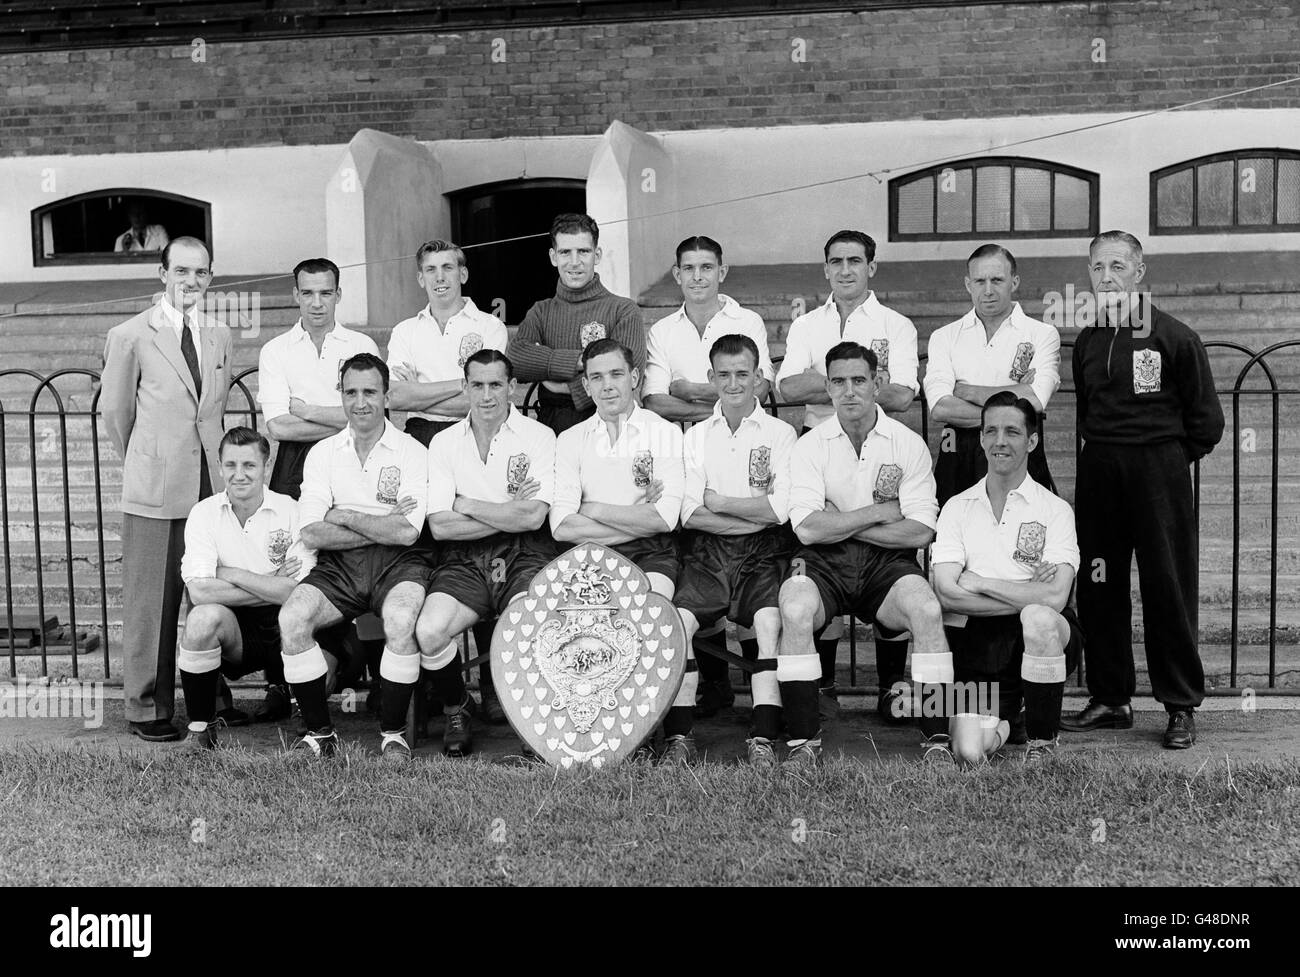 Fulham team group, photographed with their Second Division Championship trophy. (Back row, l-r) Eddie Perry (team manager) Harry Freeman, Len Quested, Doug Flack, Jim Taylor, Joe Bacuzzi, Pat Beasley, Frank Penn (trainer). (Front row, l-r) Ron Lewin, Arthur Stevens, Robert Thomas, Arthur Rowley, Sidney Thomas, John McDonald, Dave Bewley Stock Photo